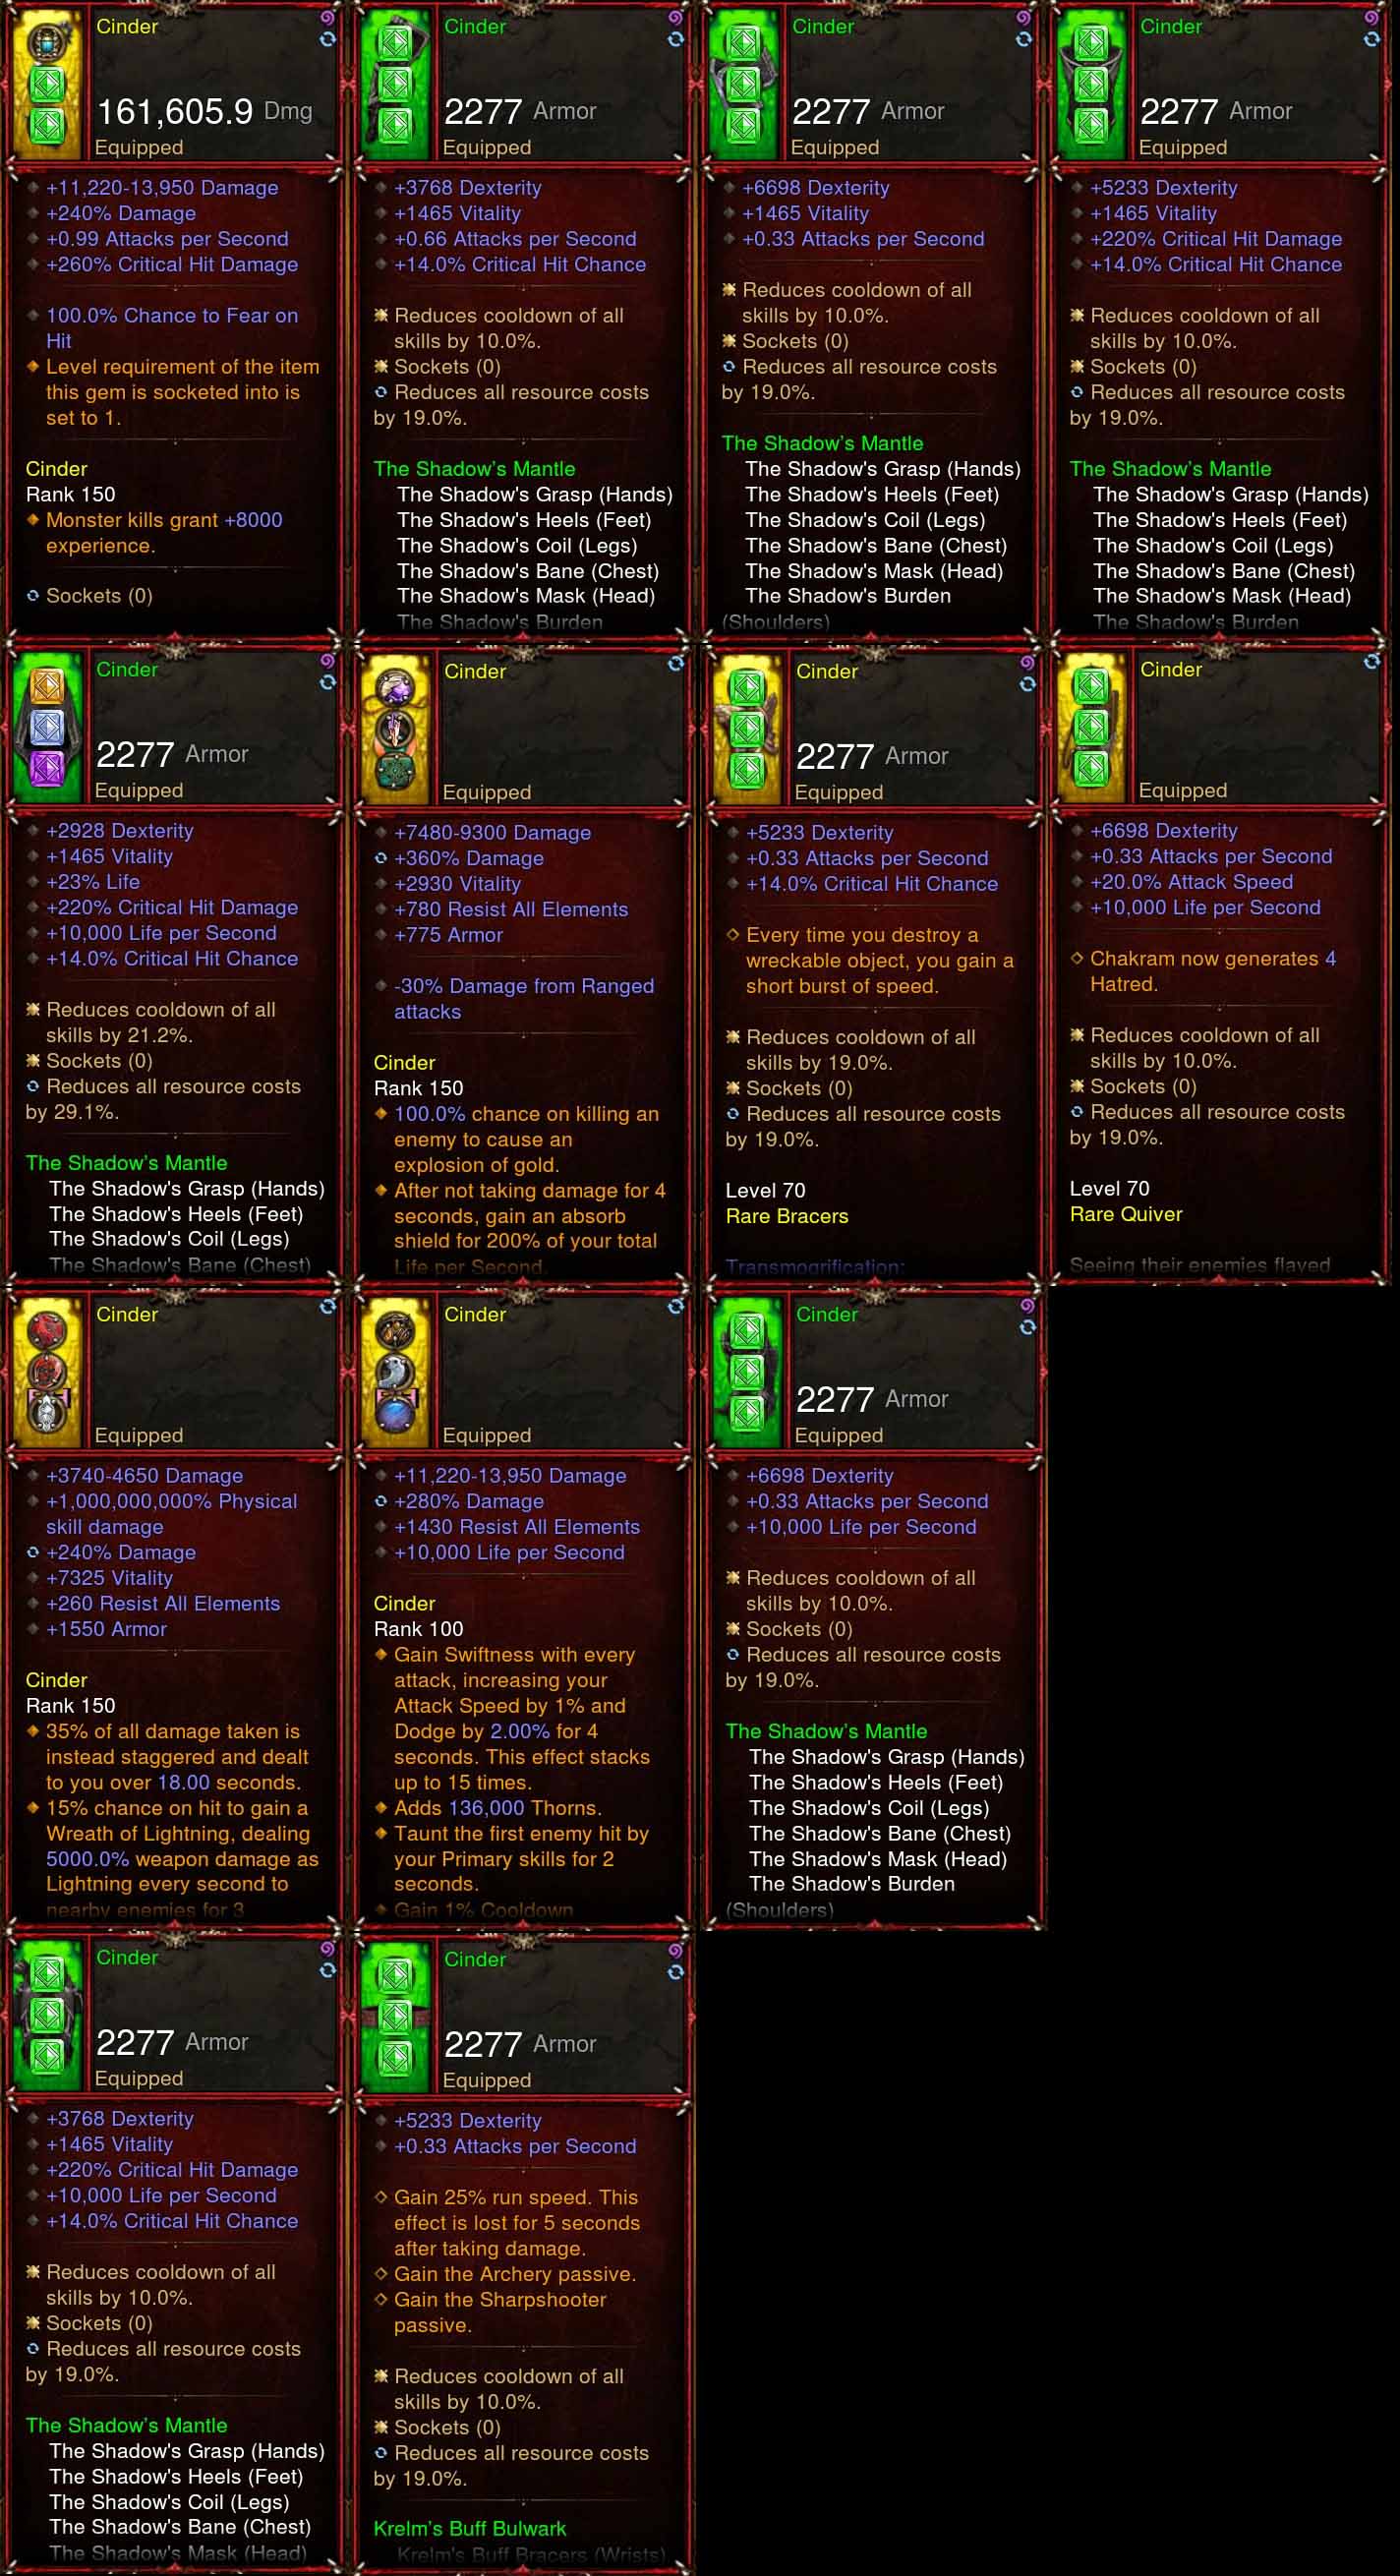 [Primal Ancient] [ Quad DPS] Mortality v1 Cinder Super Movement Speed Shadow Mantle Set (Faster Than IMv5's) Diablo 3 Mods ROS Seasonal and Non Seasonal Save Mod - Modded Items and Gear - Hacks - Cheats - Trainers for Playstation 4 - Playstation 5 - Nintendo Switch - Xbox One